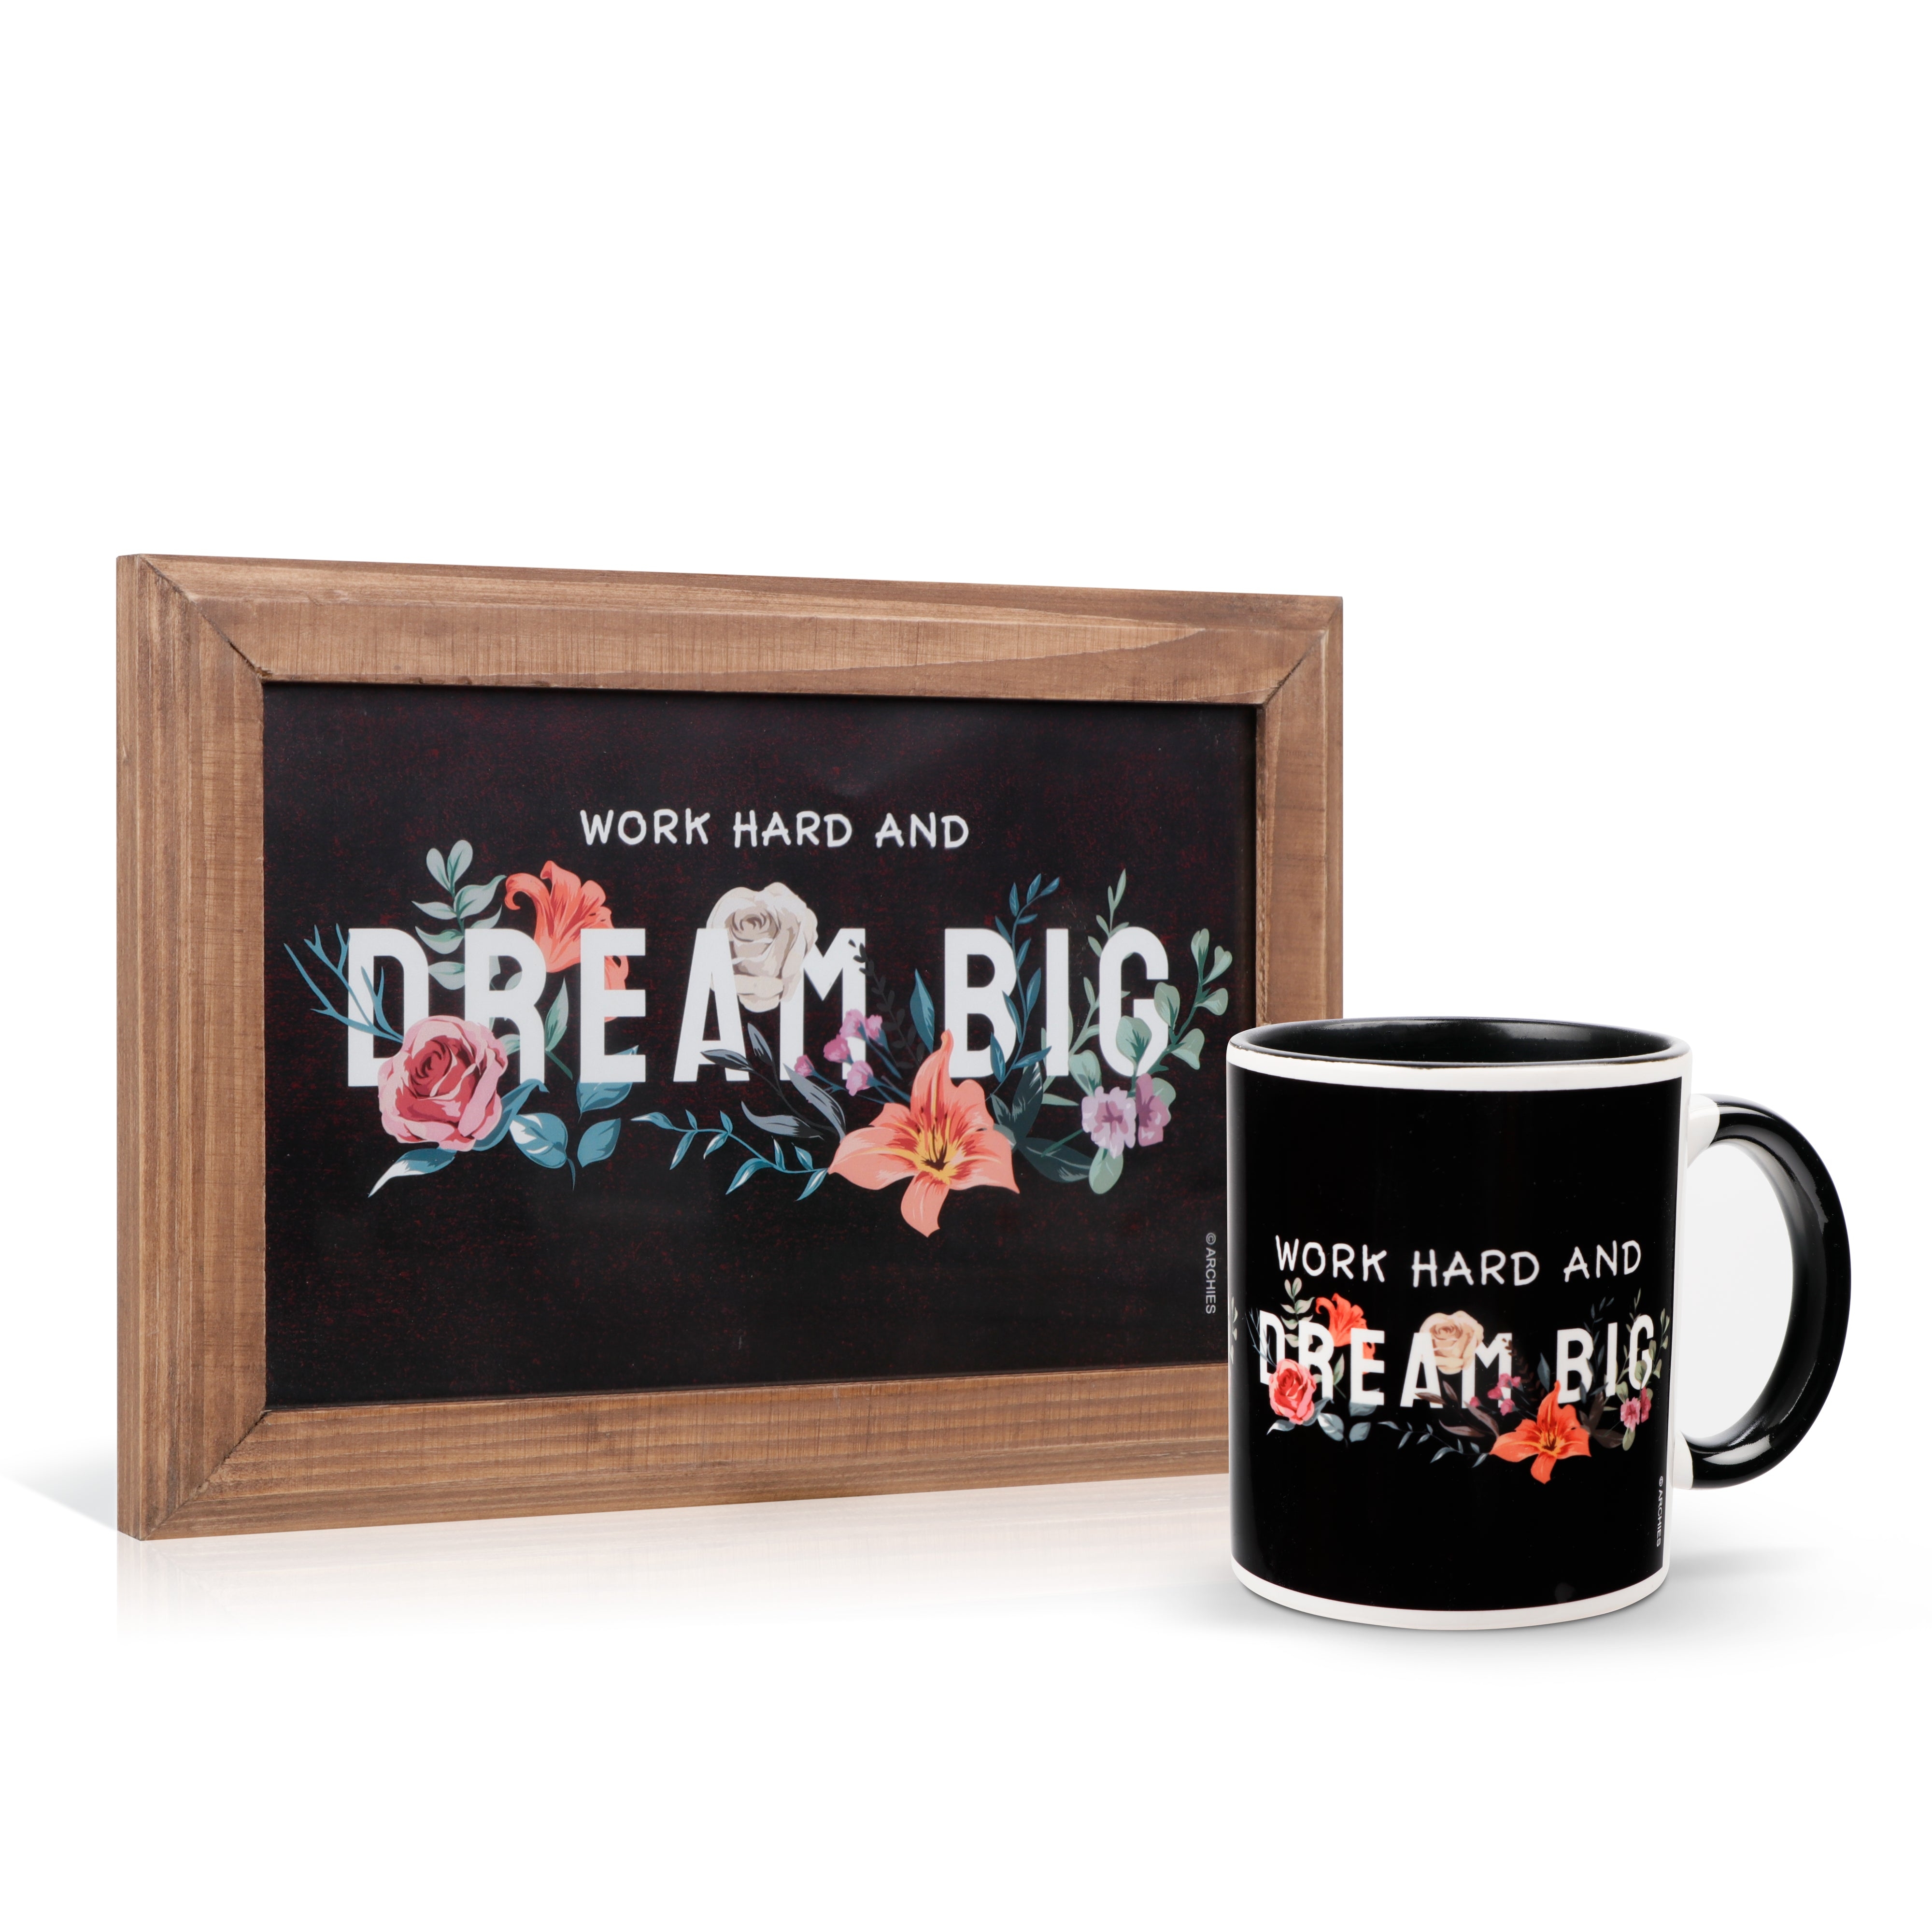 Archies | Archies KEEP SAKE Combo Gift with Ceramic Mug and Elevated Initial Quotatio- DREAM BIG